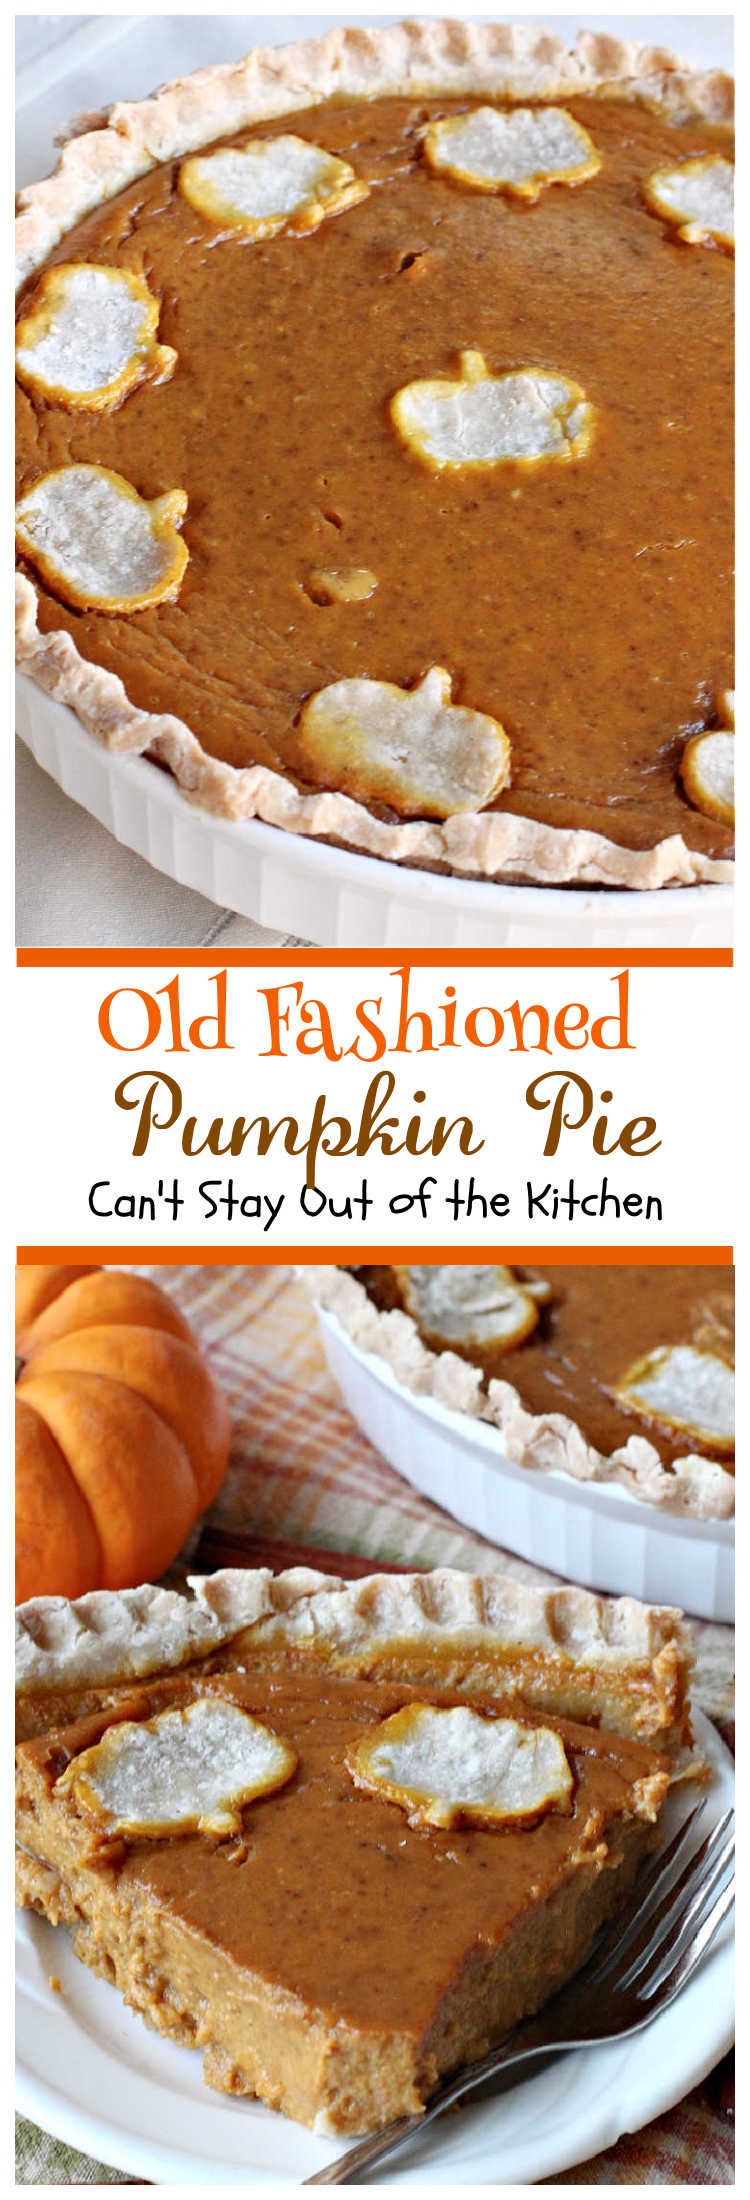 Old Fashioned Pumpkin Pie | Can't Stay Out of the Kitchen | the BEST #PumpkinPie ever! This vintage #BettyCrocker #recipe will have you drooling over every bite. Great for #Thanksgiving or #Christmas. #pie #dessert #pumpkin #PumpkinDessert #OldFashionedPumpkinPie